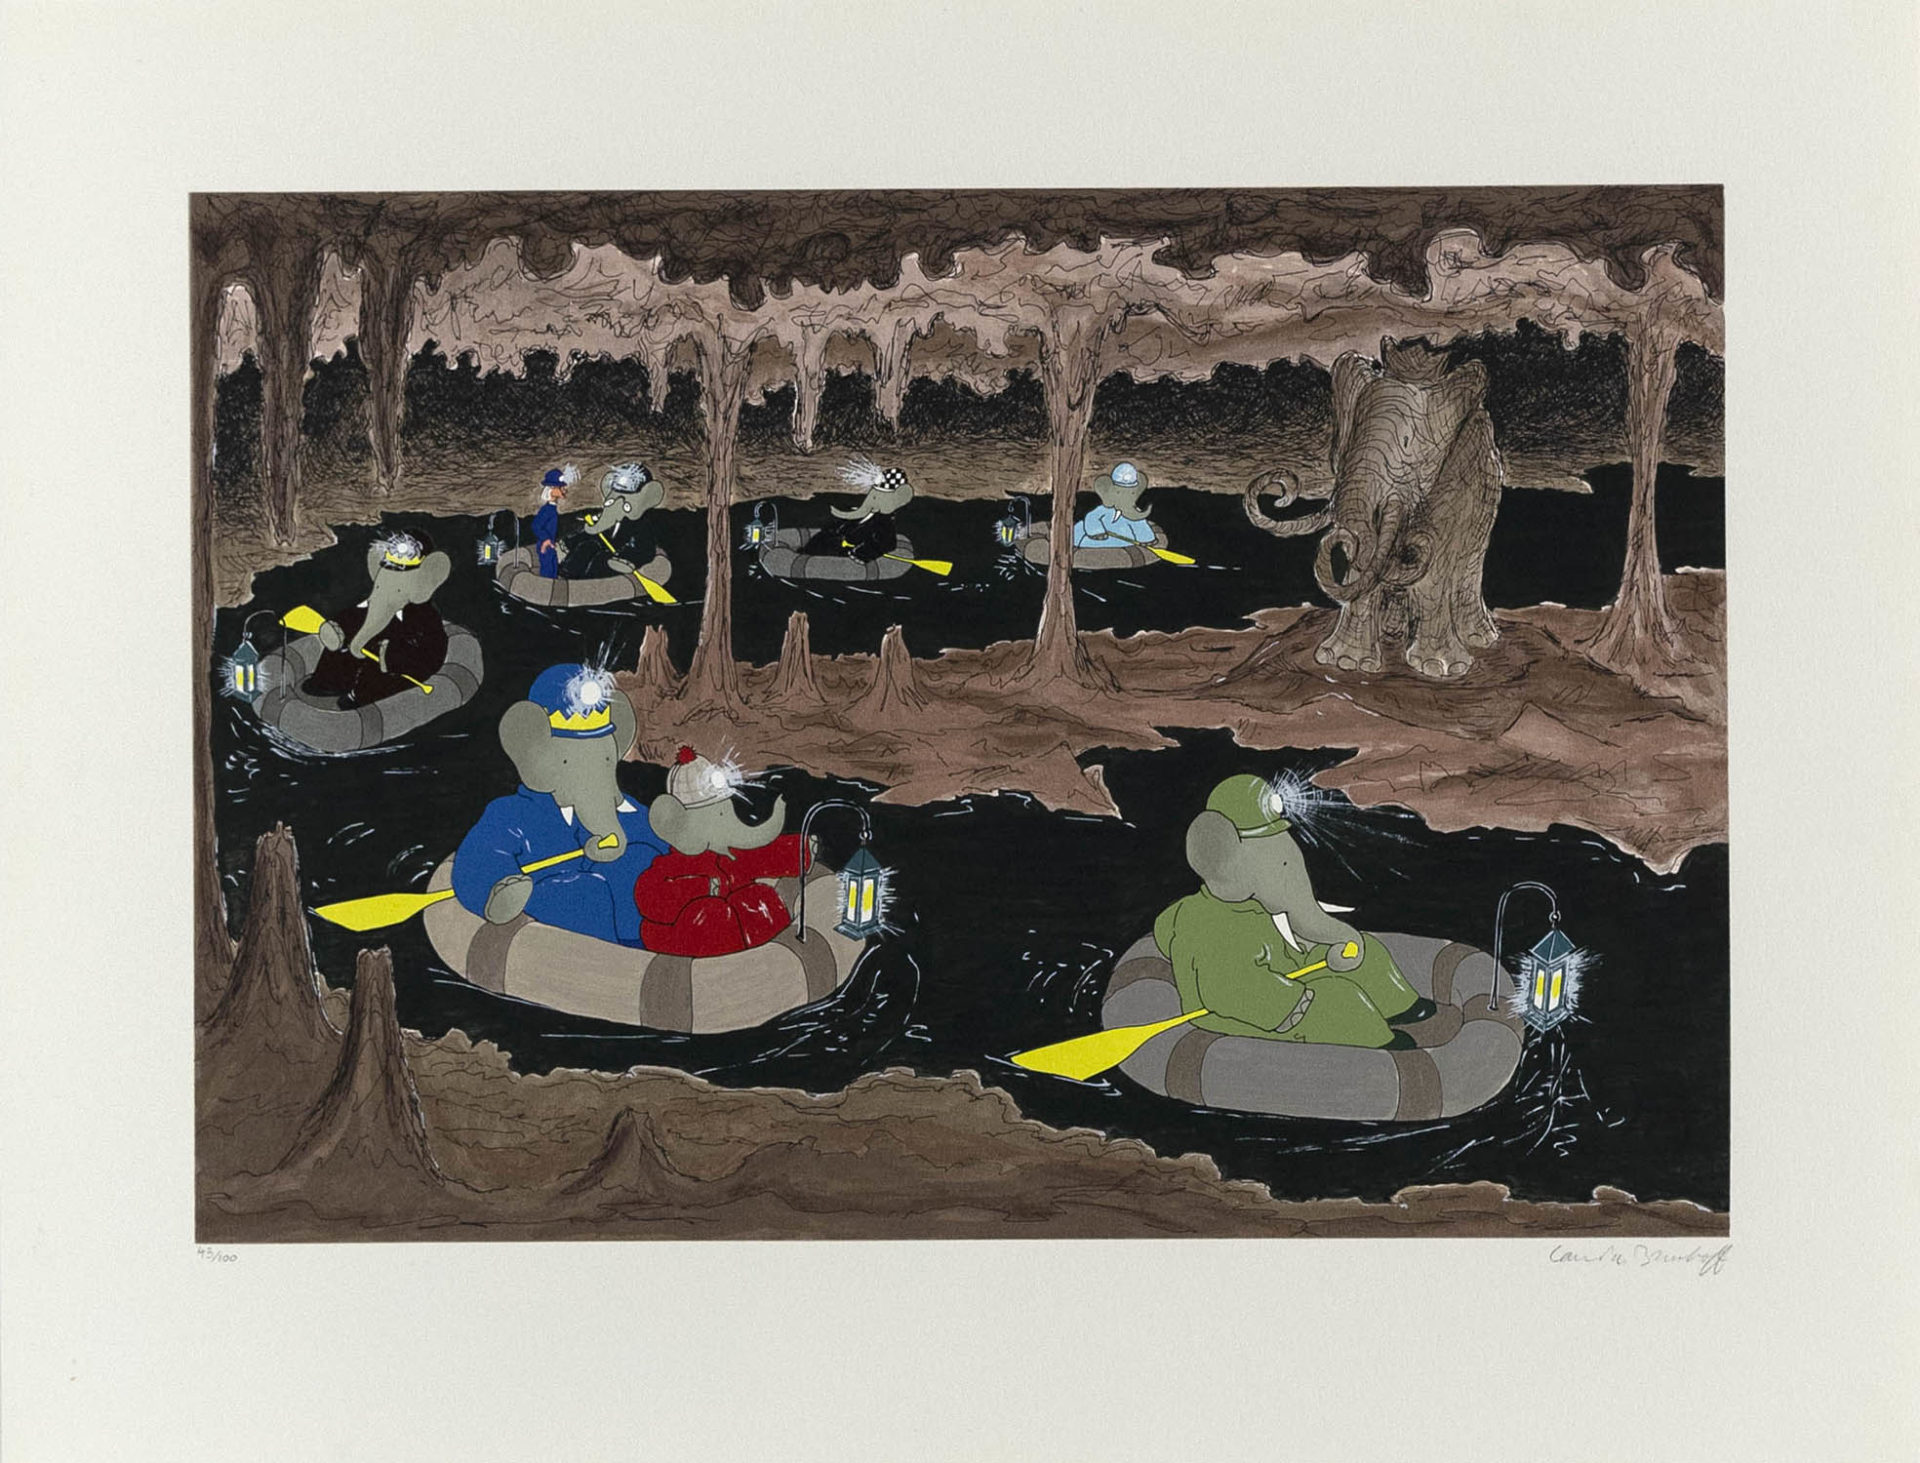 The Cave of the Mammoth, 1994, 37 color silkscreen, 22 3/4 x 29 1/4 inches (57.8 x 74.3 cm), Edition of 100